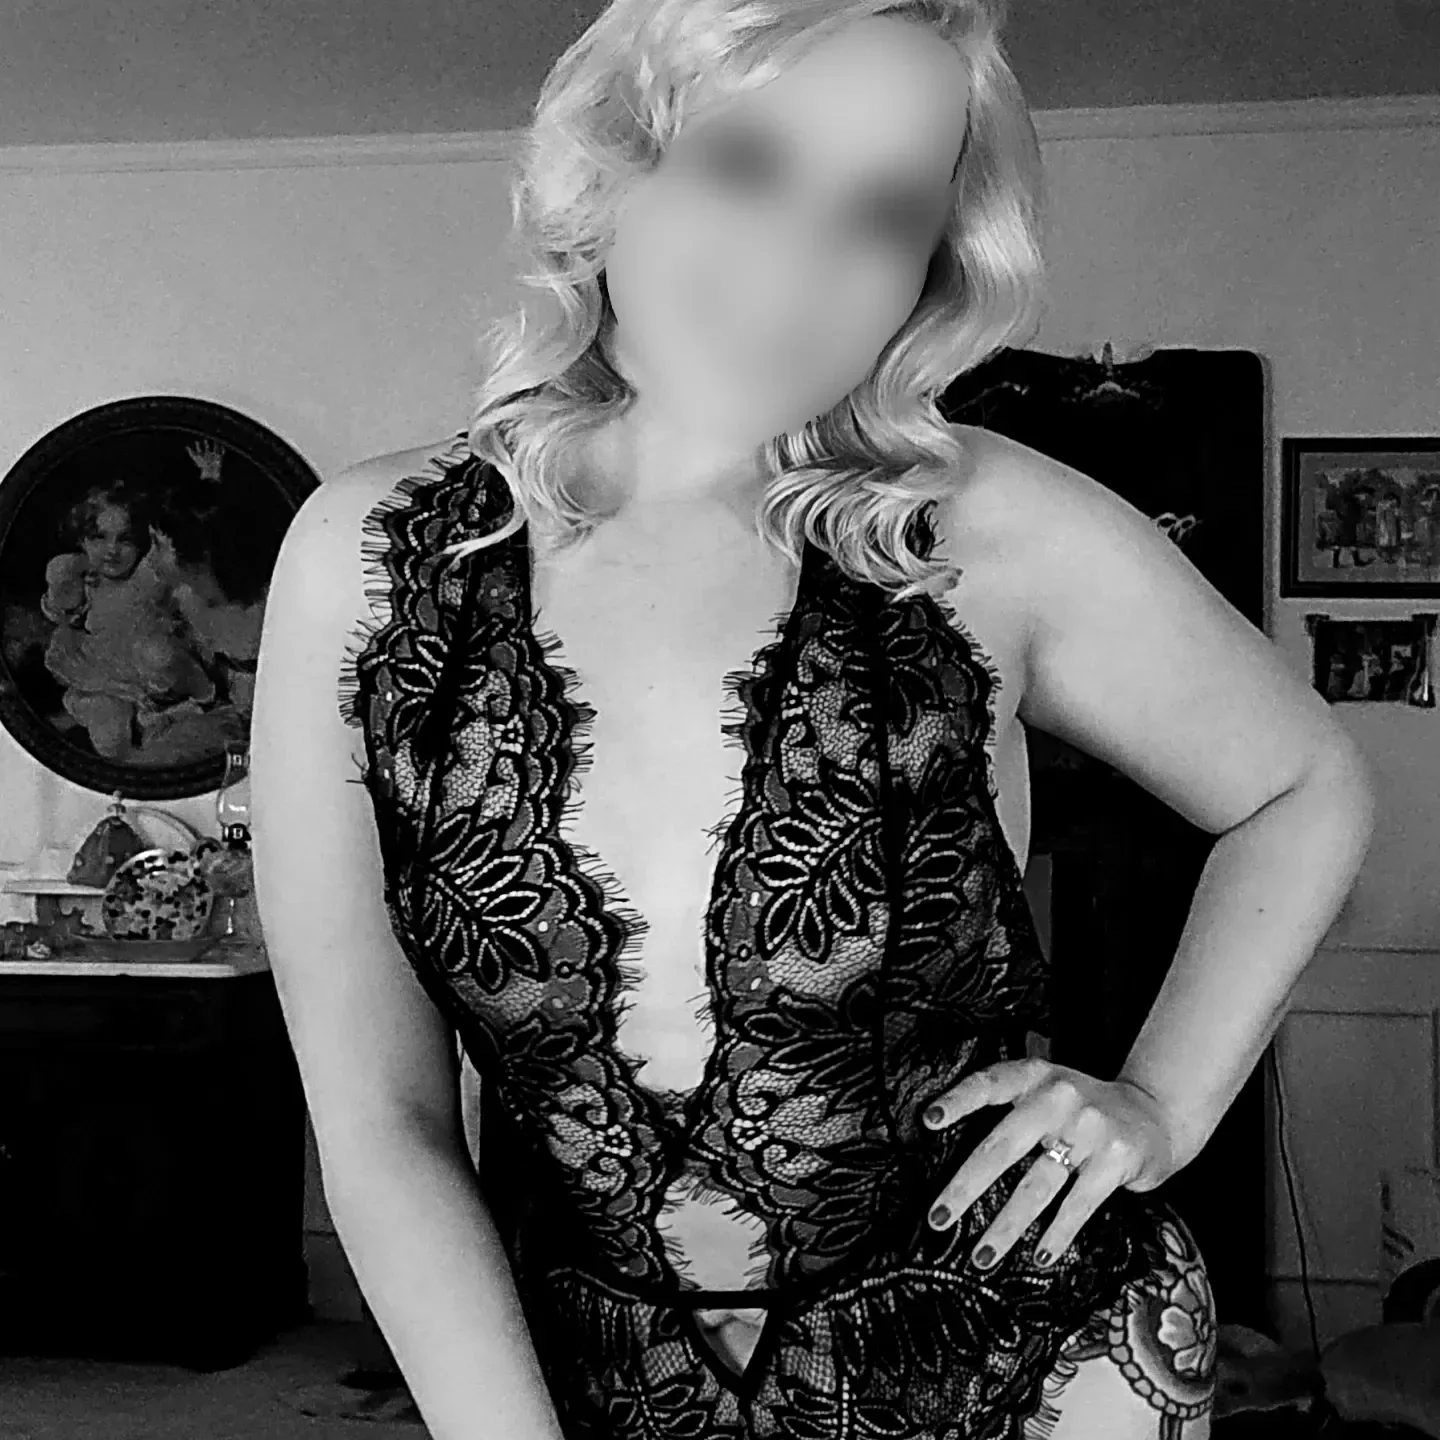 Photo by 50shadesofsavannah with the username @50shadesofsavannah, who is a star user,  April 3, 2023 at 7:56 AM. The post is about the topic Sexy Lingerie and the text says '❓️Do you prefer this pic in black and white or color❓️

I update to my Twitter a little more often than I do here, so feel free to follow me there as well! 

https://mobile.twitter.com/vannahblack29

Onlyfans.com/xo50shades_of_savannah'